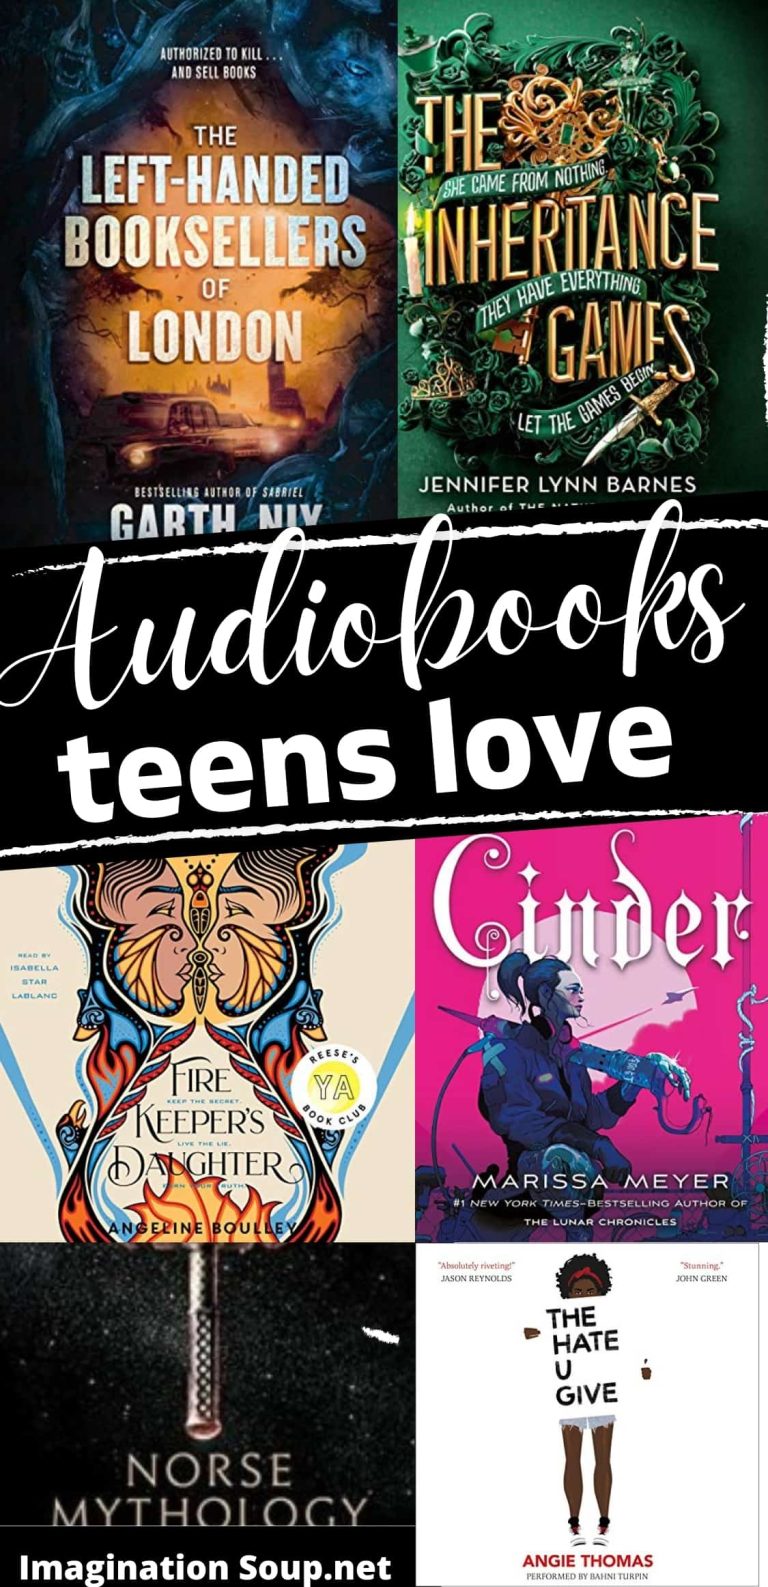 What Are Some Recommended Audiobooks For Teens?